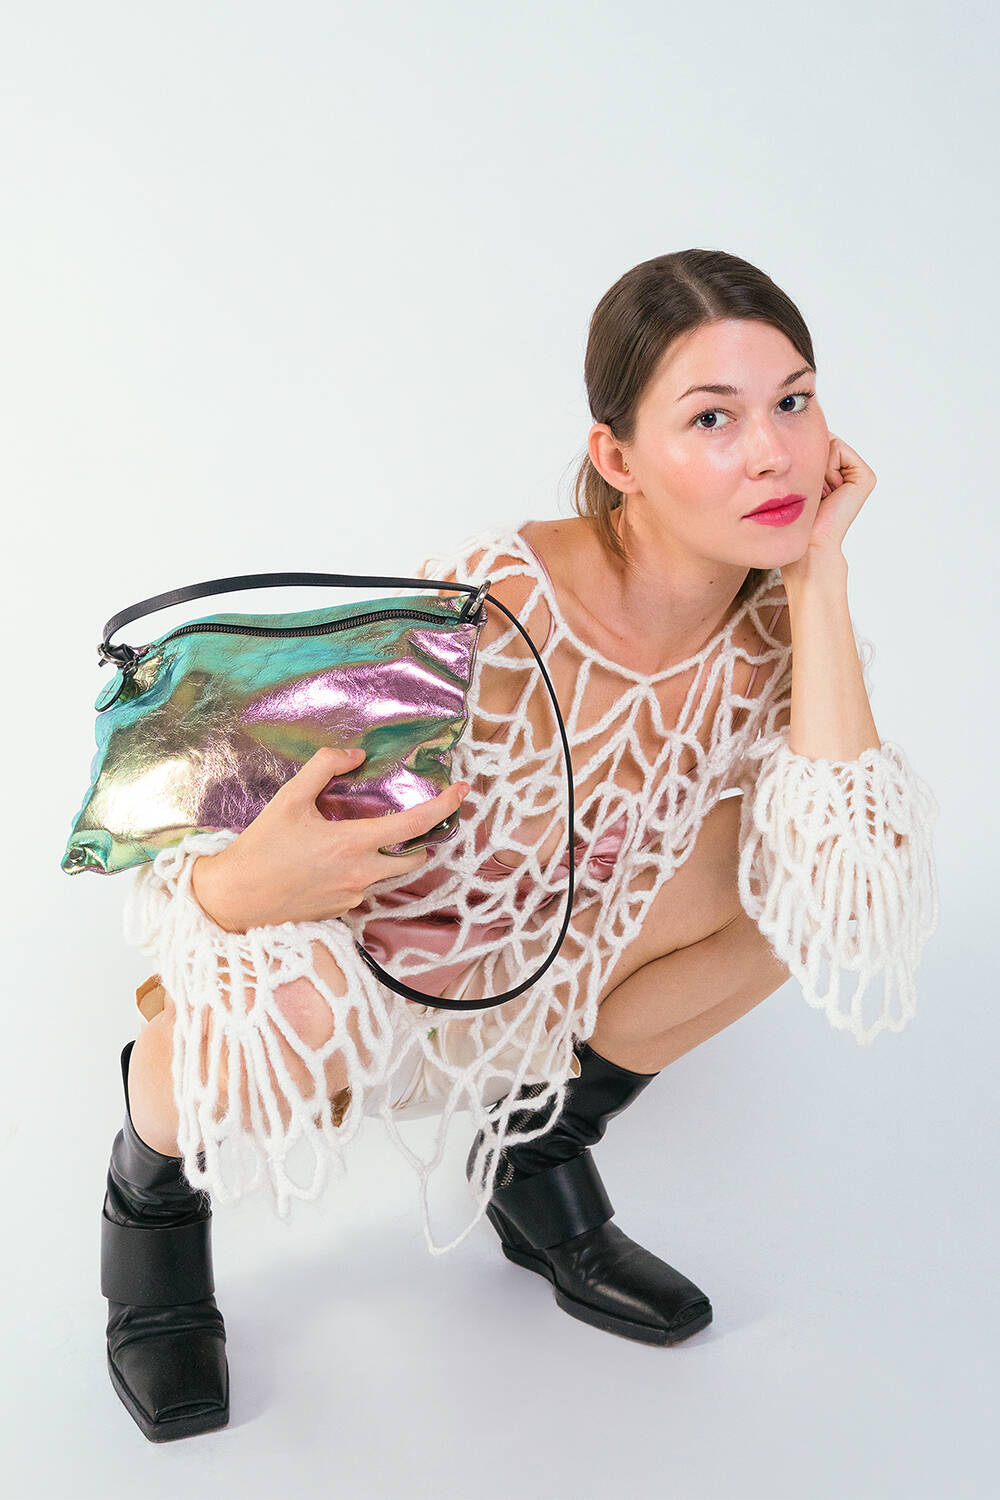 A woman in a white, netted outfit and black boots crouches, holding a shiny INA KENT bag with multicolored accents, looking directly at the camera.